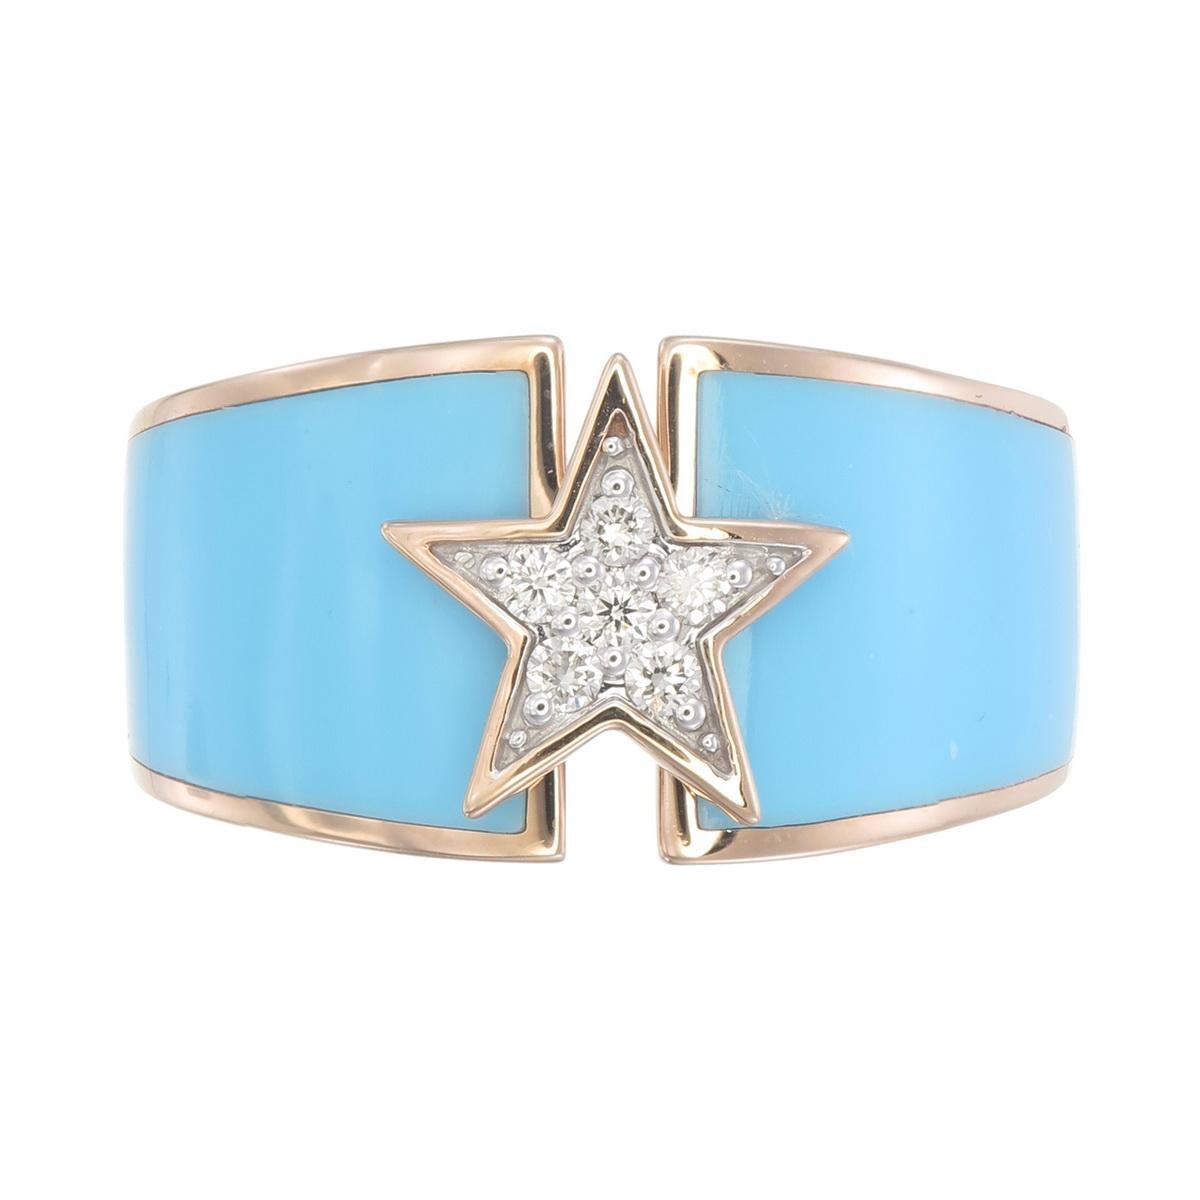 Ring made in 18kt gold with natural diamonds and Turquoise ceramic

3.61 GRAMS & 0.11 CARAT OF NATURAL DIAMONDS USED 

